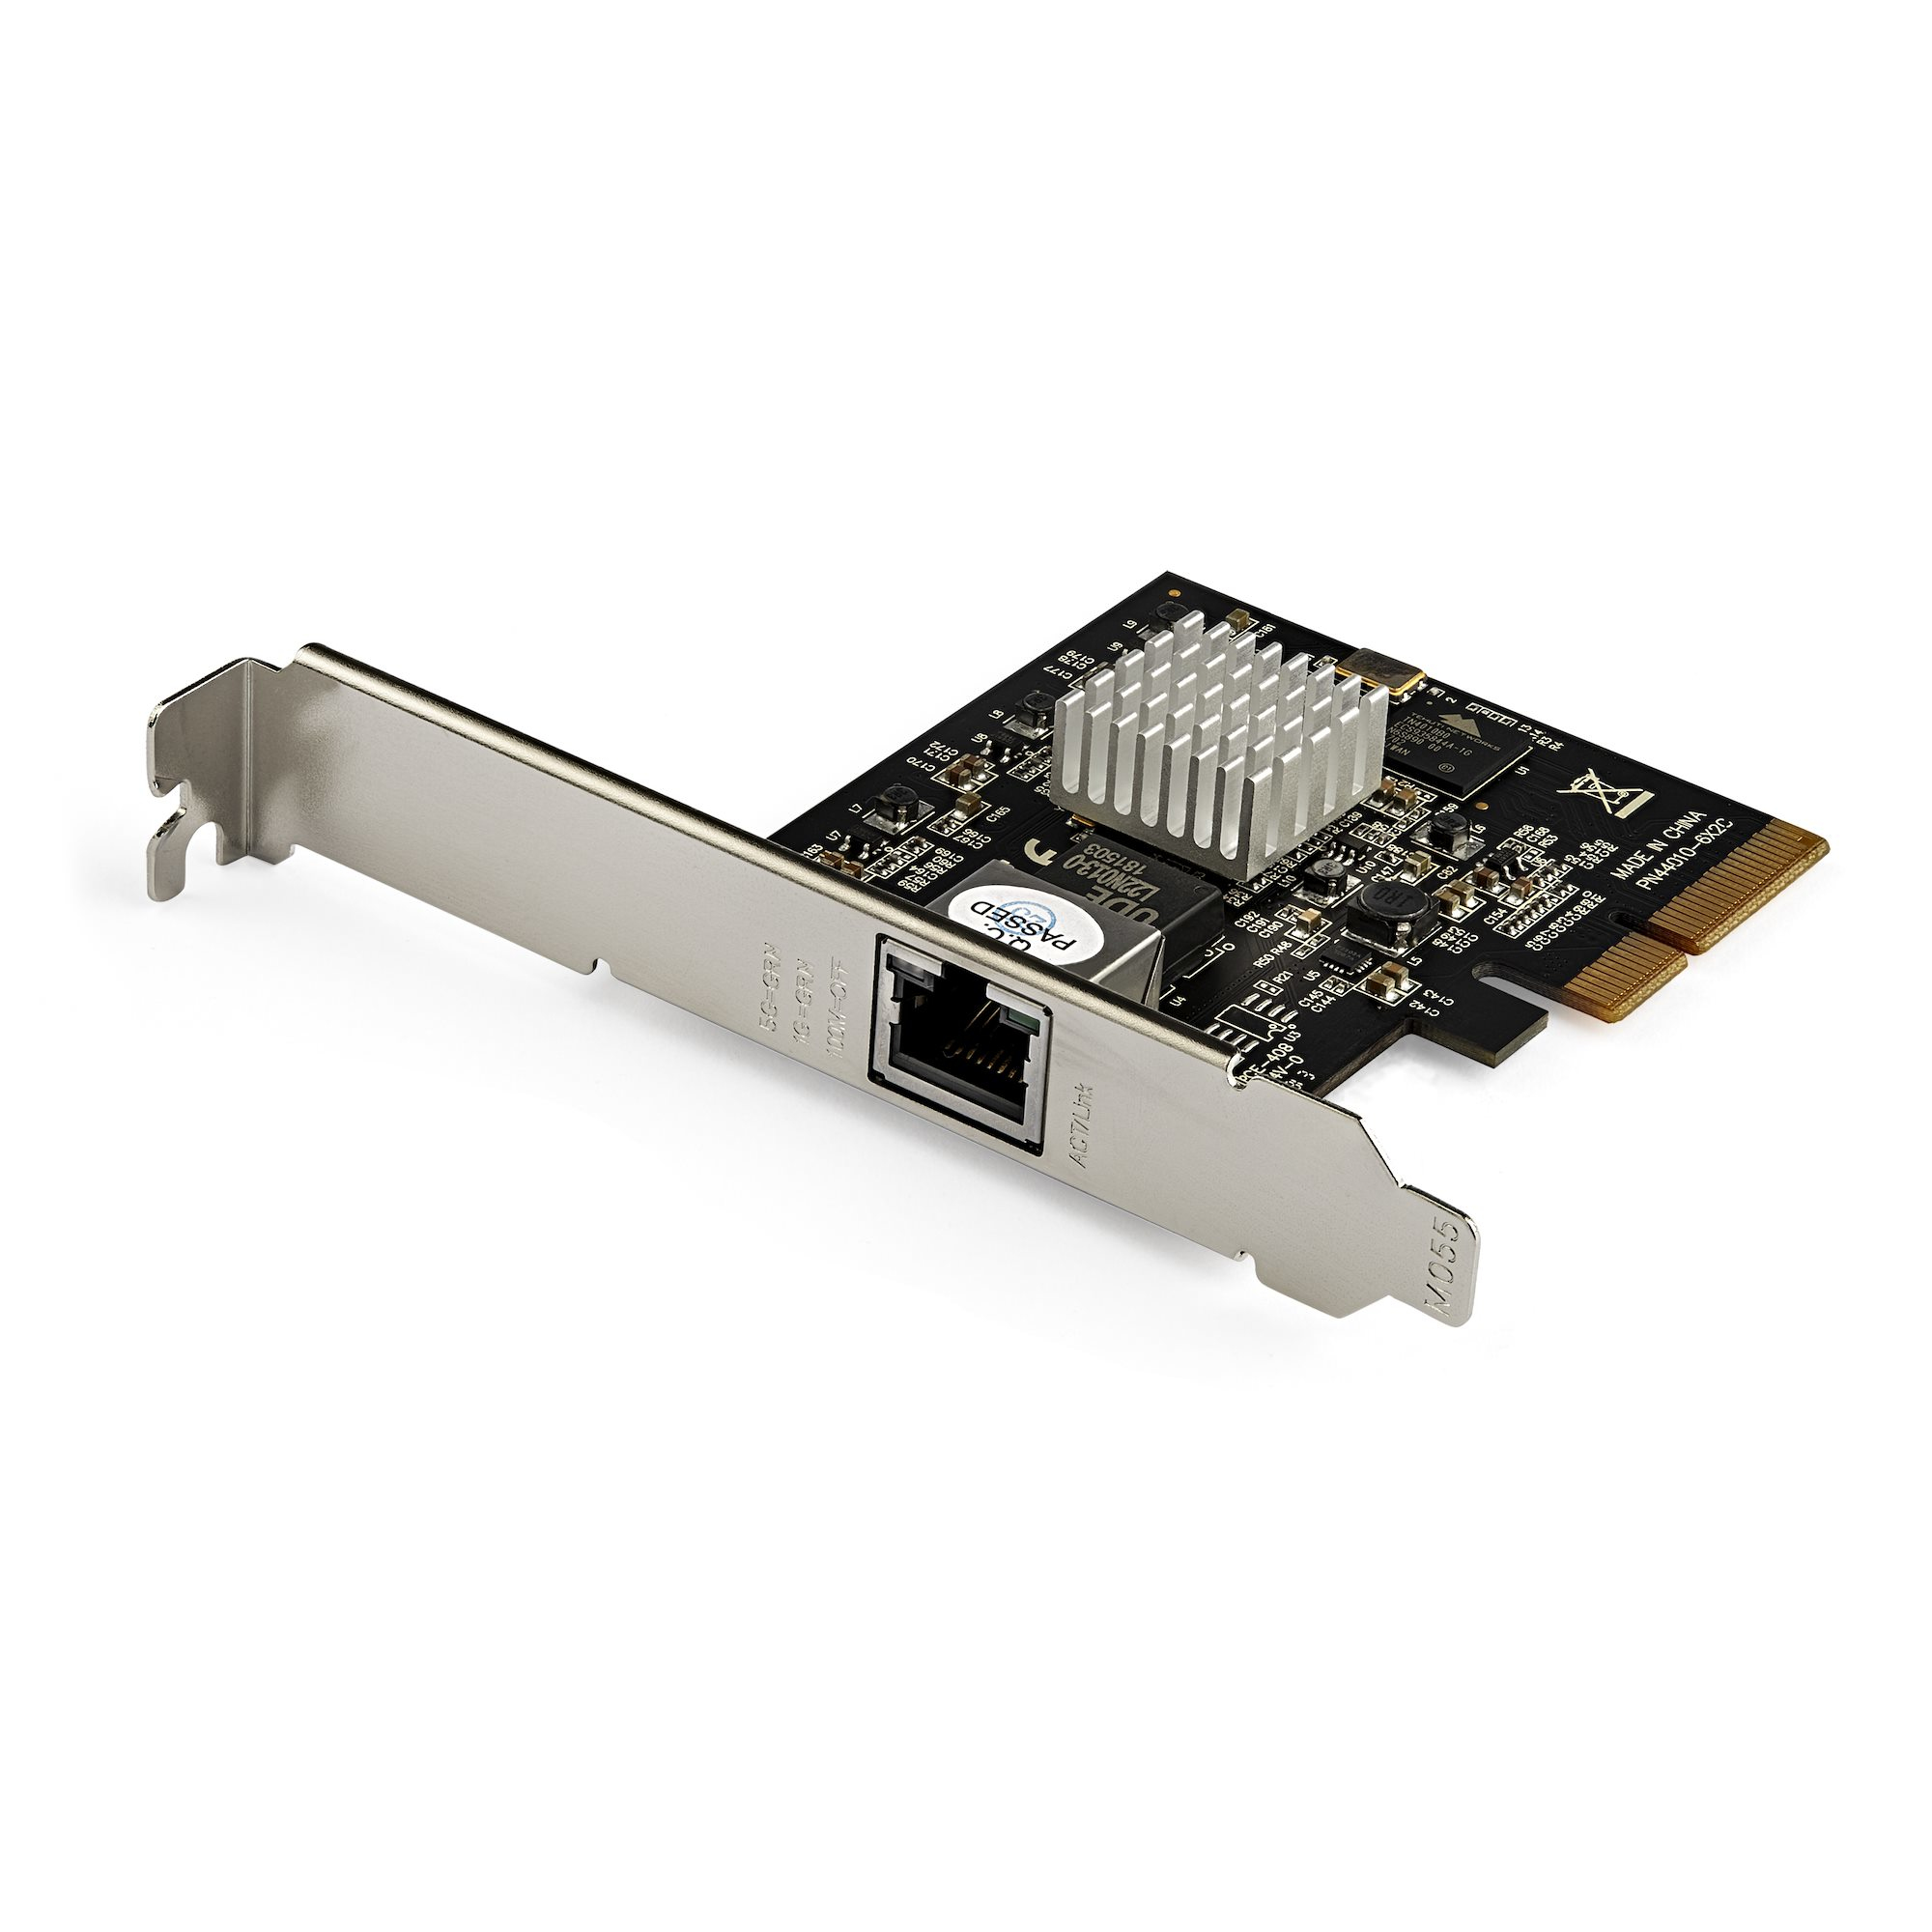 StarTech.com 5G PCIe Network Adapter Card, NBASE-T & 5GBASE-T 2.5BASE-T PCI Express Network Interface Adapter, 5GbE/2.5GbE/1GbE Multi Gigabit Ethernet Workstation NIC, 4 Speed LAN Card - 5G PCIe Network Card (ST5GPEXNB)